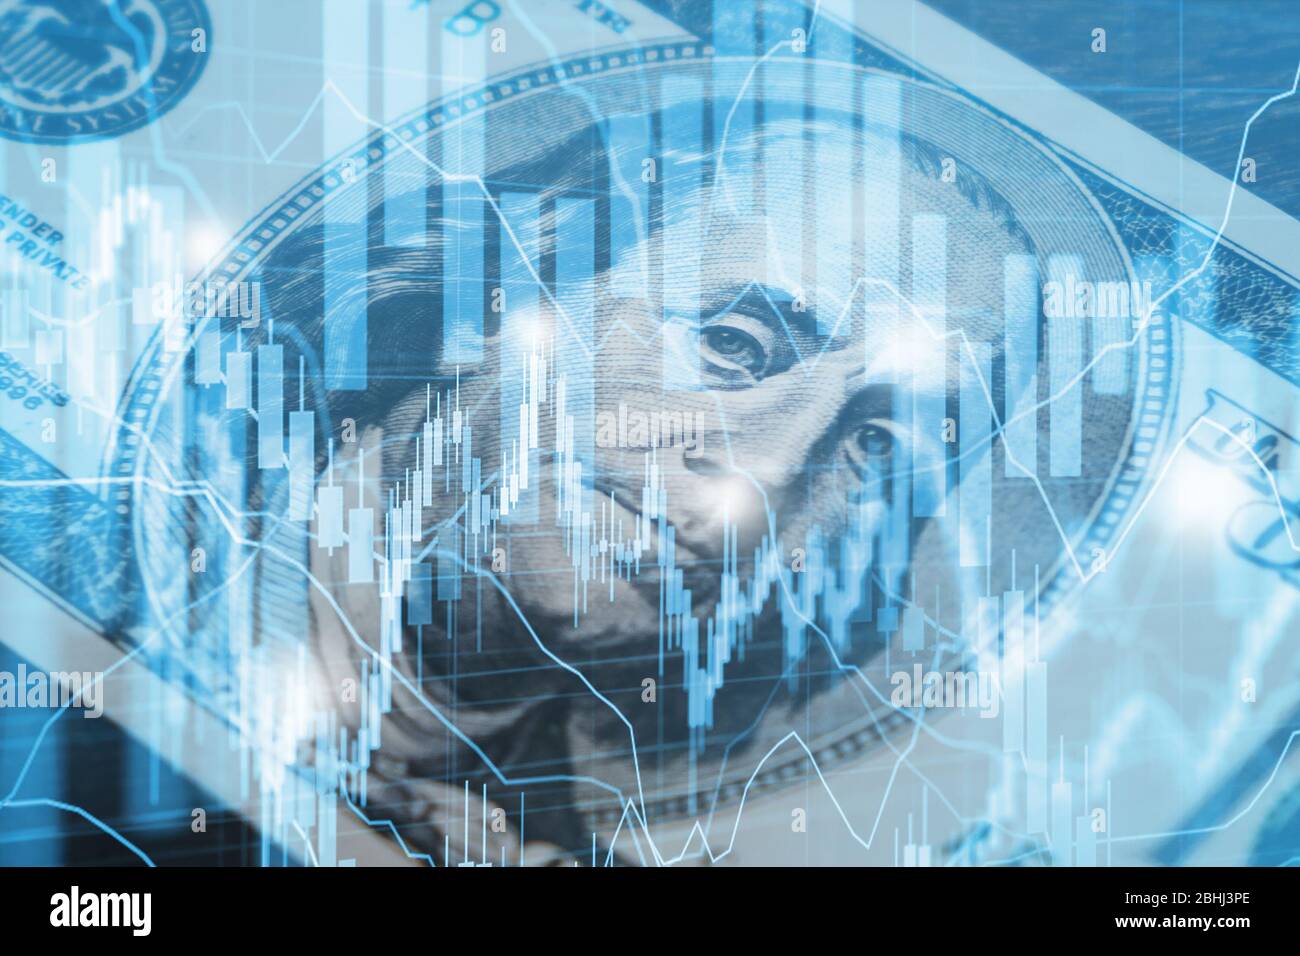 hundred dollar bill and stock market charts - USD money and currency trading concept Stock Photo